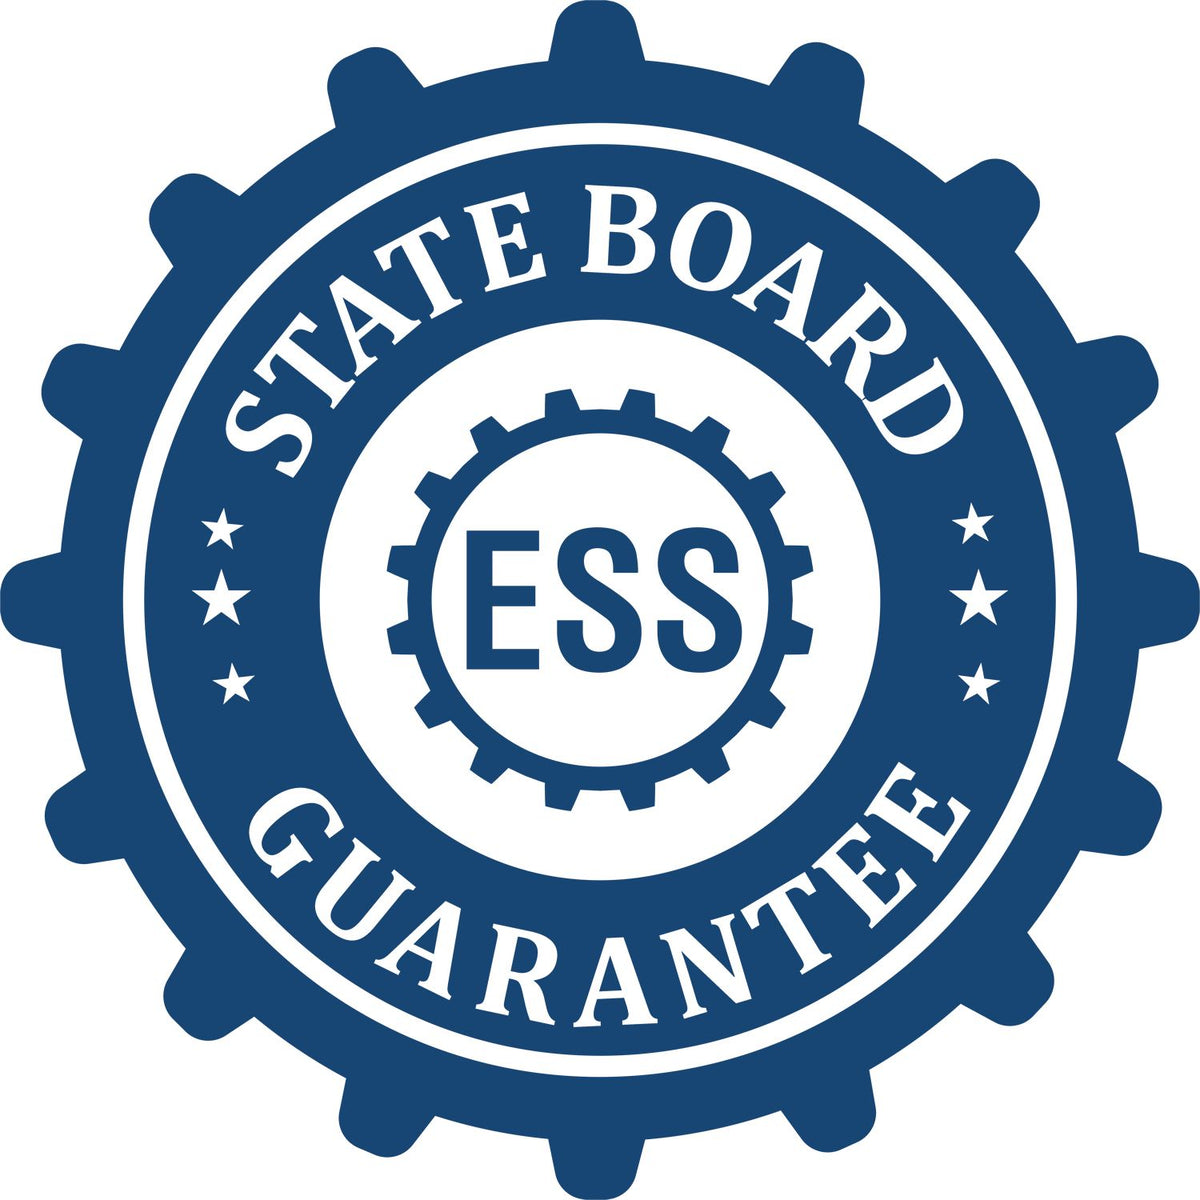 An emblem in a gear shape illustrating a state board guarantee for the Hybrid Utah Landscape Architect Seal